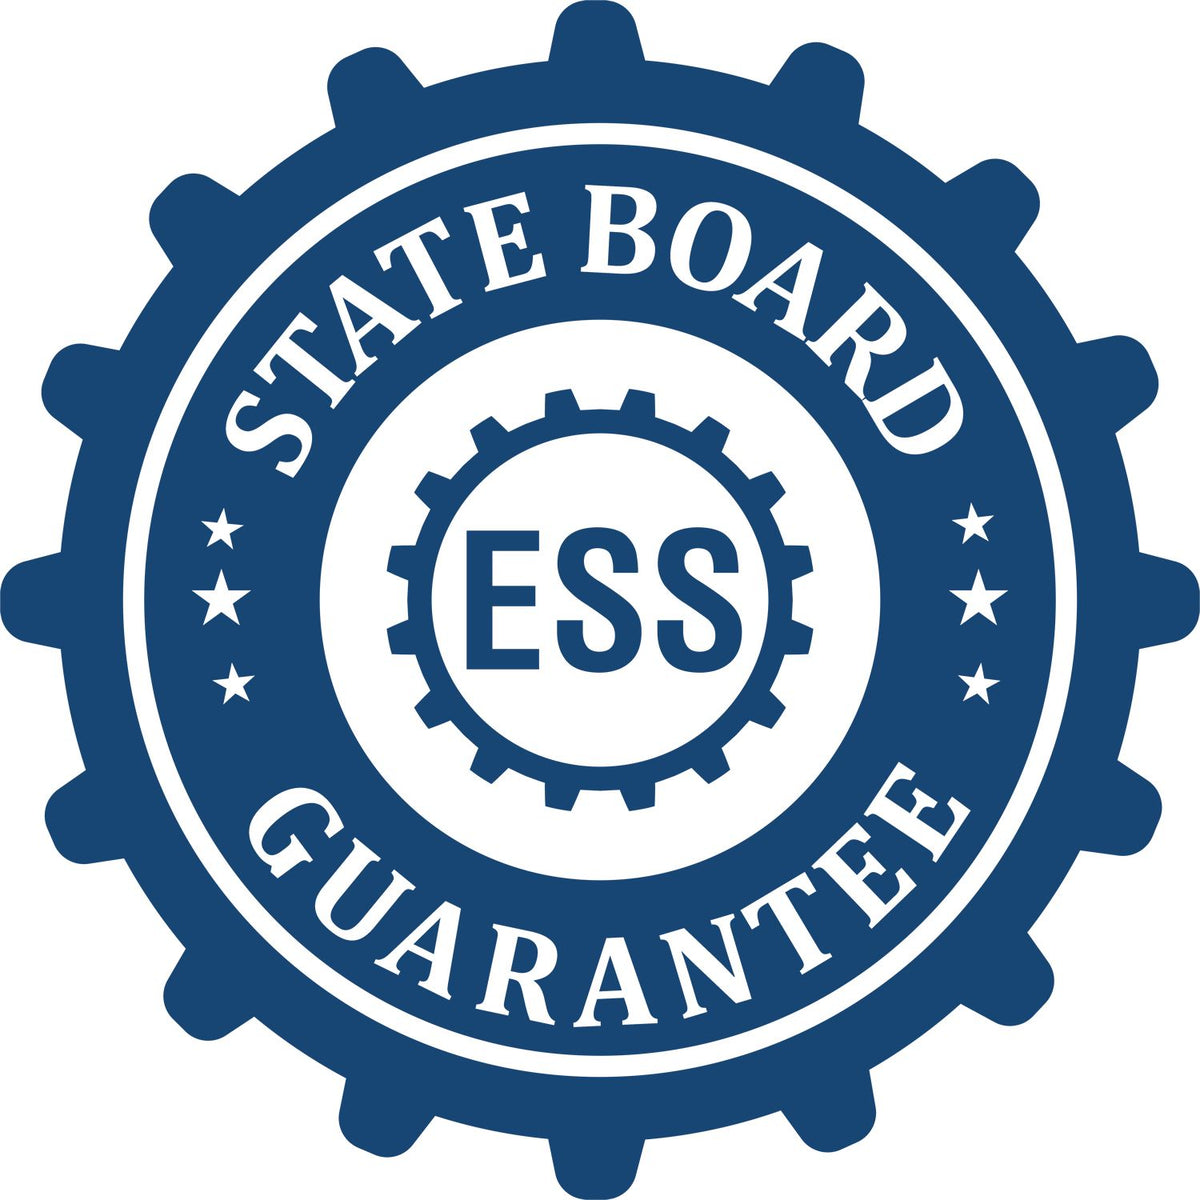 An emblem in a gear shape illustrating a state board guarantee for the Mississippi Landscape Architectural Seal Stamp product.